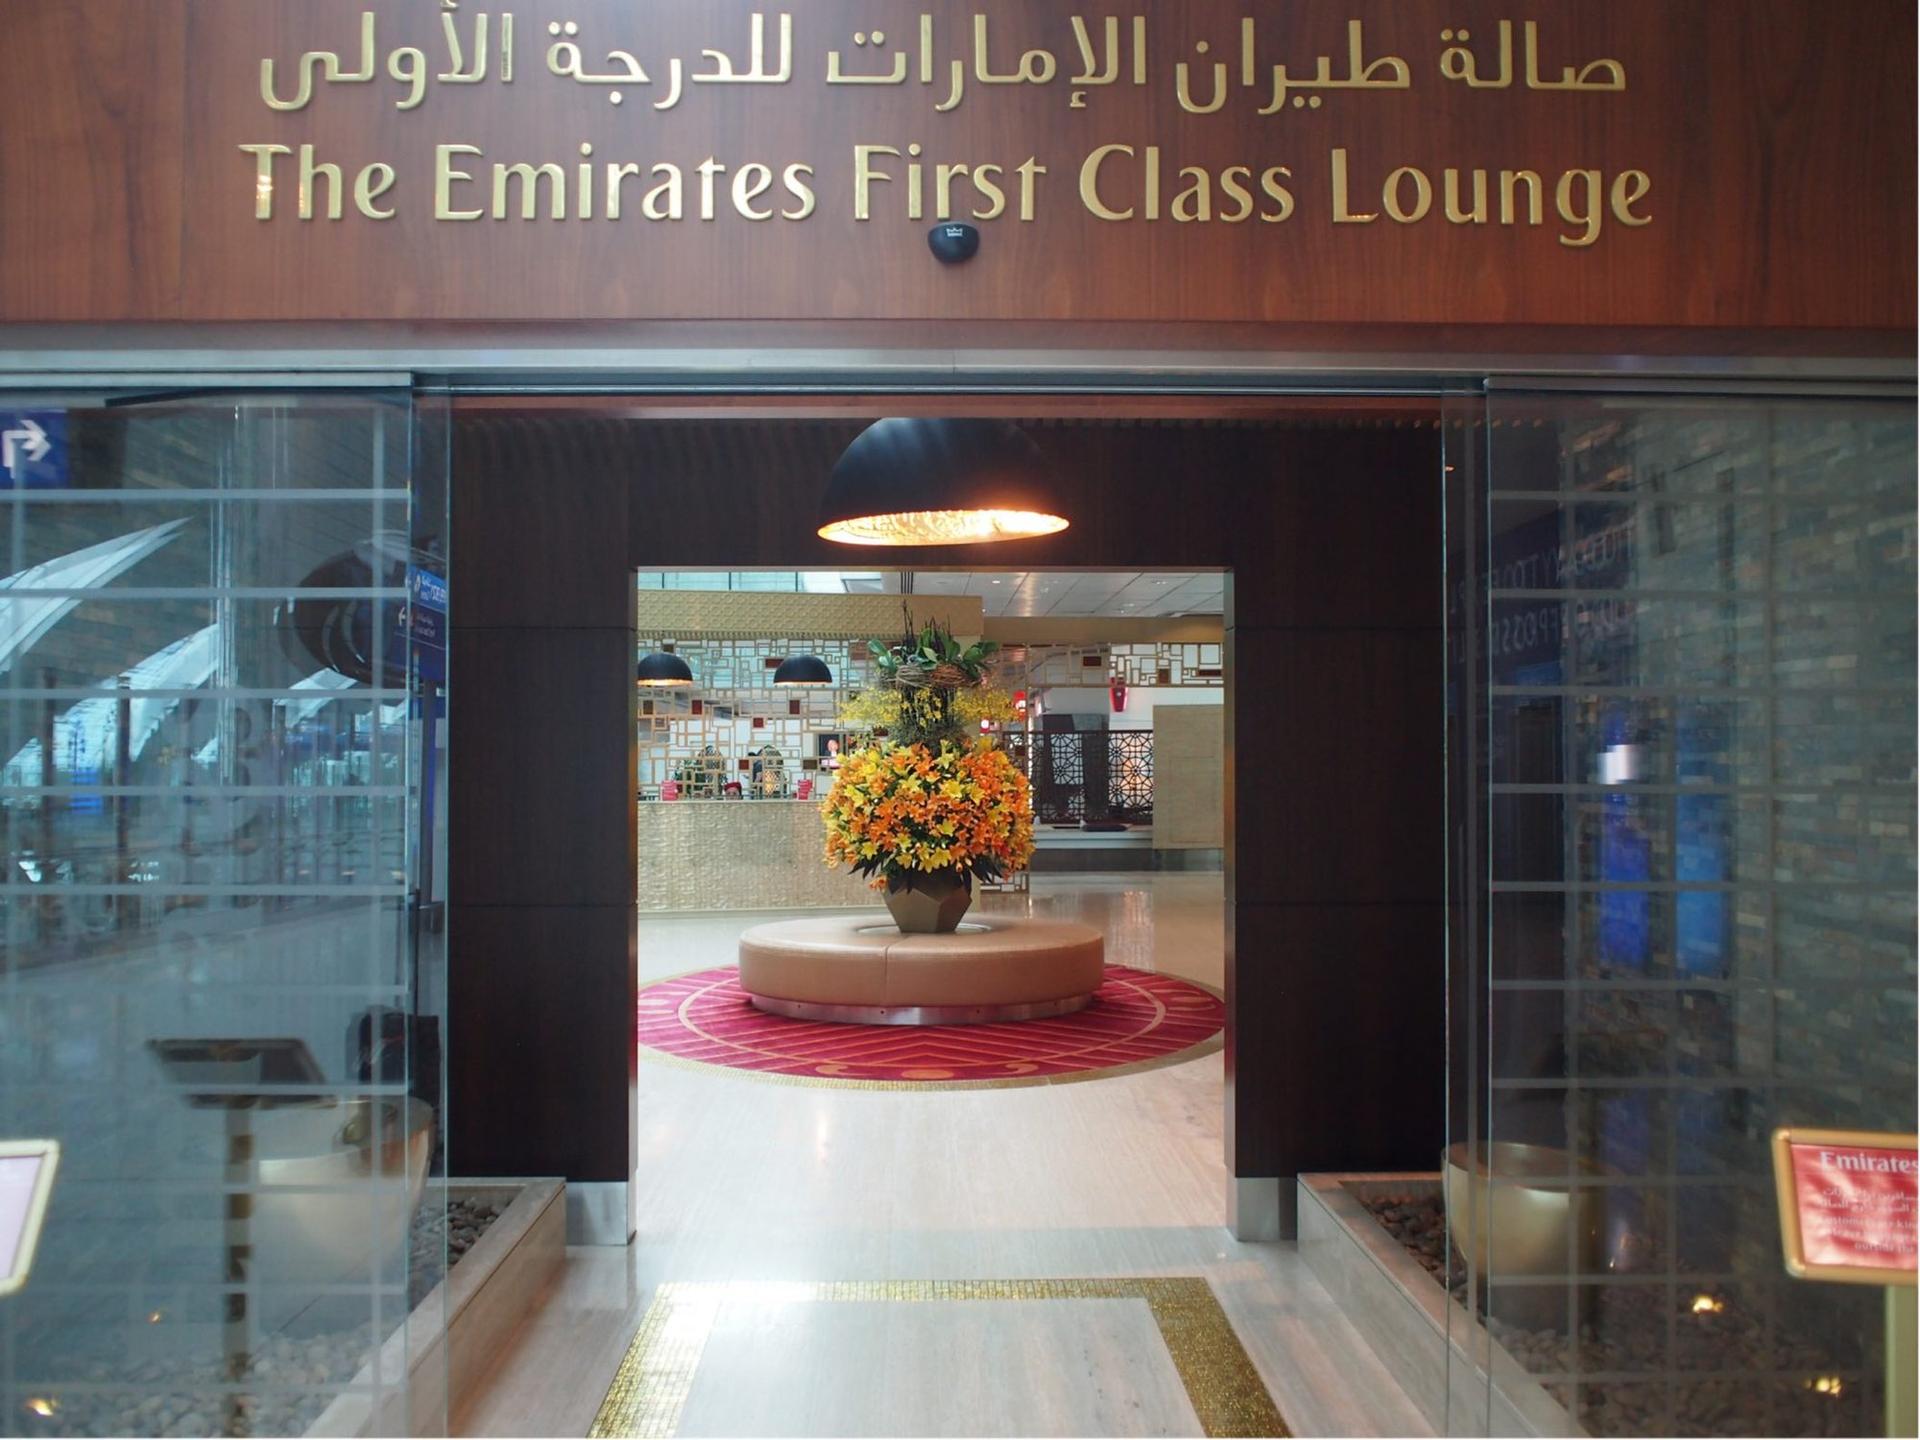 Emirates First Class Lounge image 7 of 25